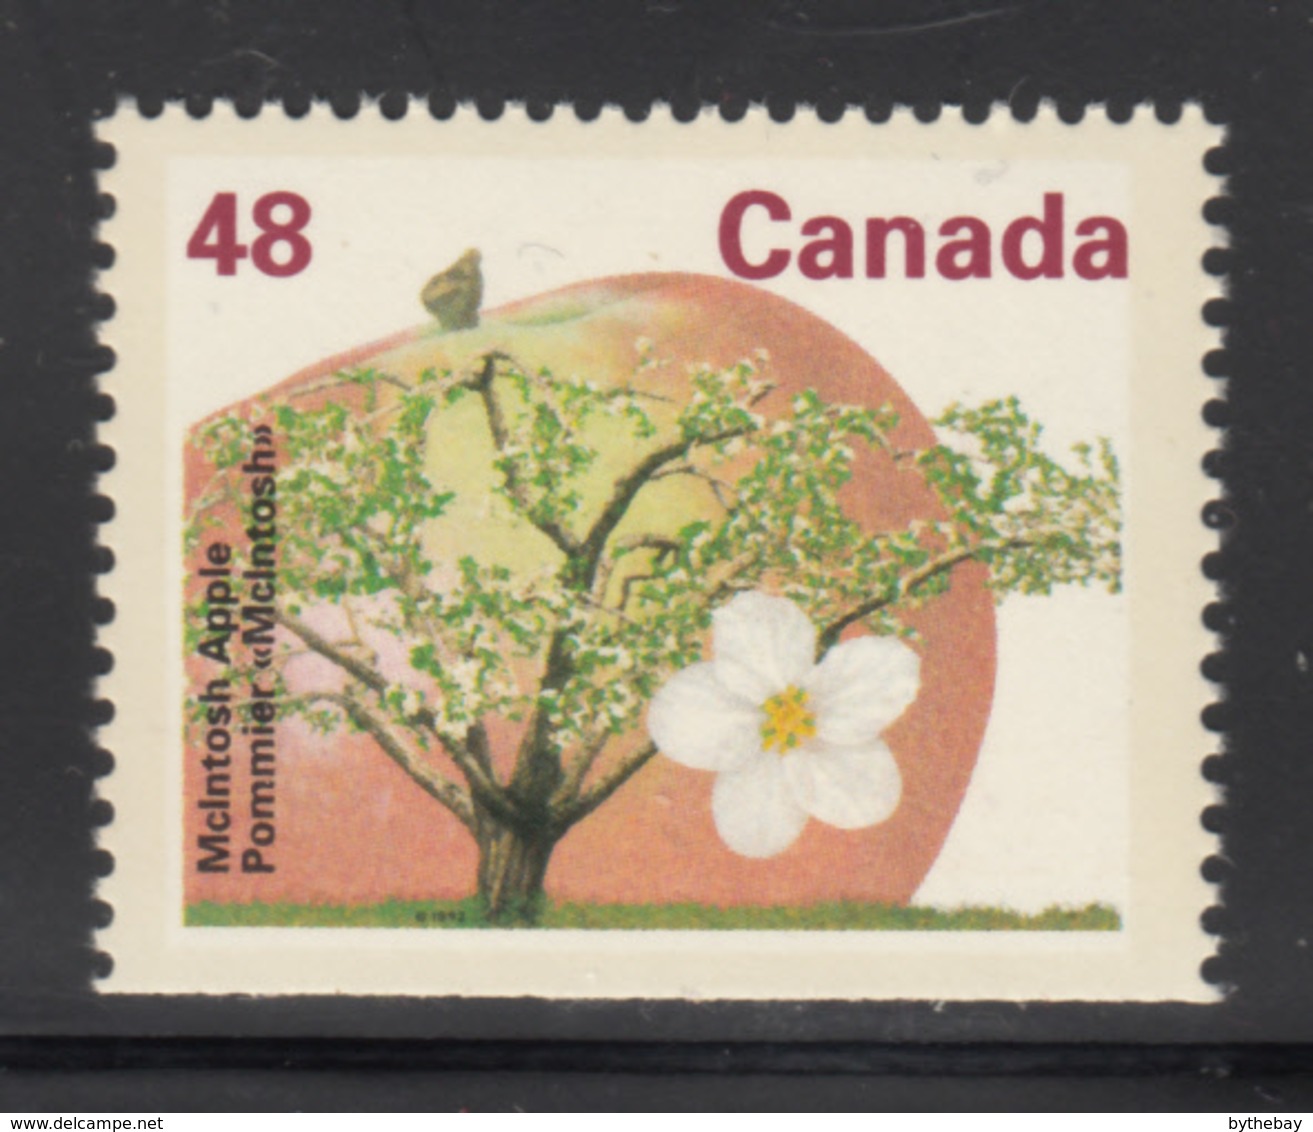 Canada 1991 MNH Sc #1363a 48c McIntosh Apple Booklet Single Ex BK142 - Timbres Seuls